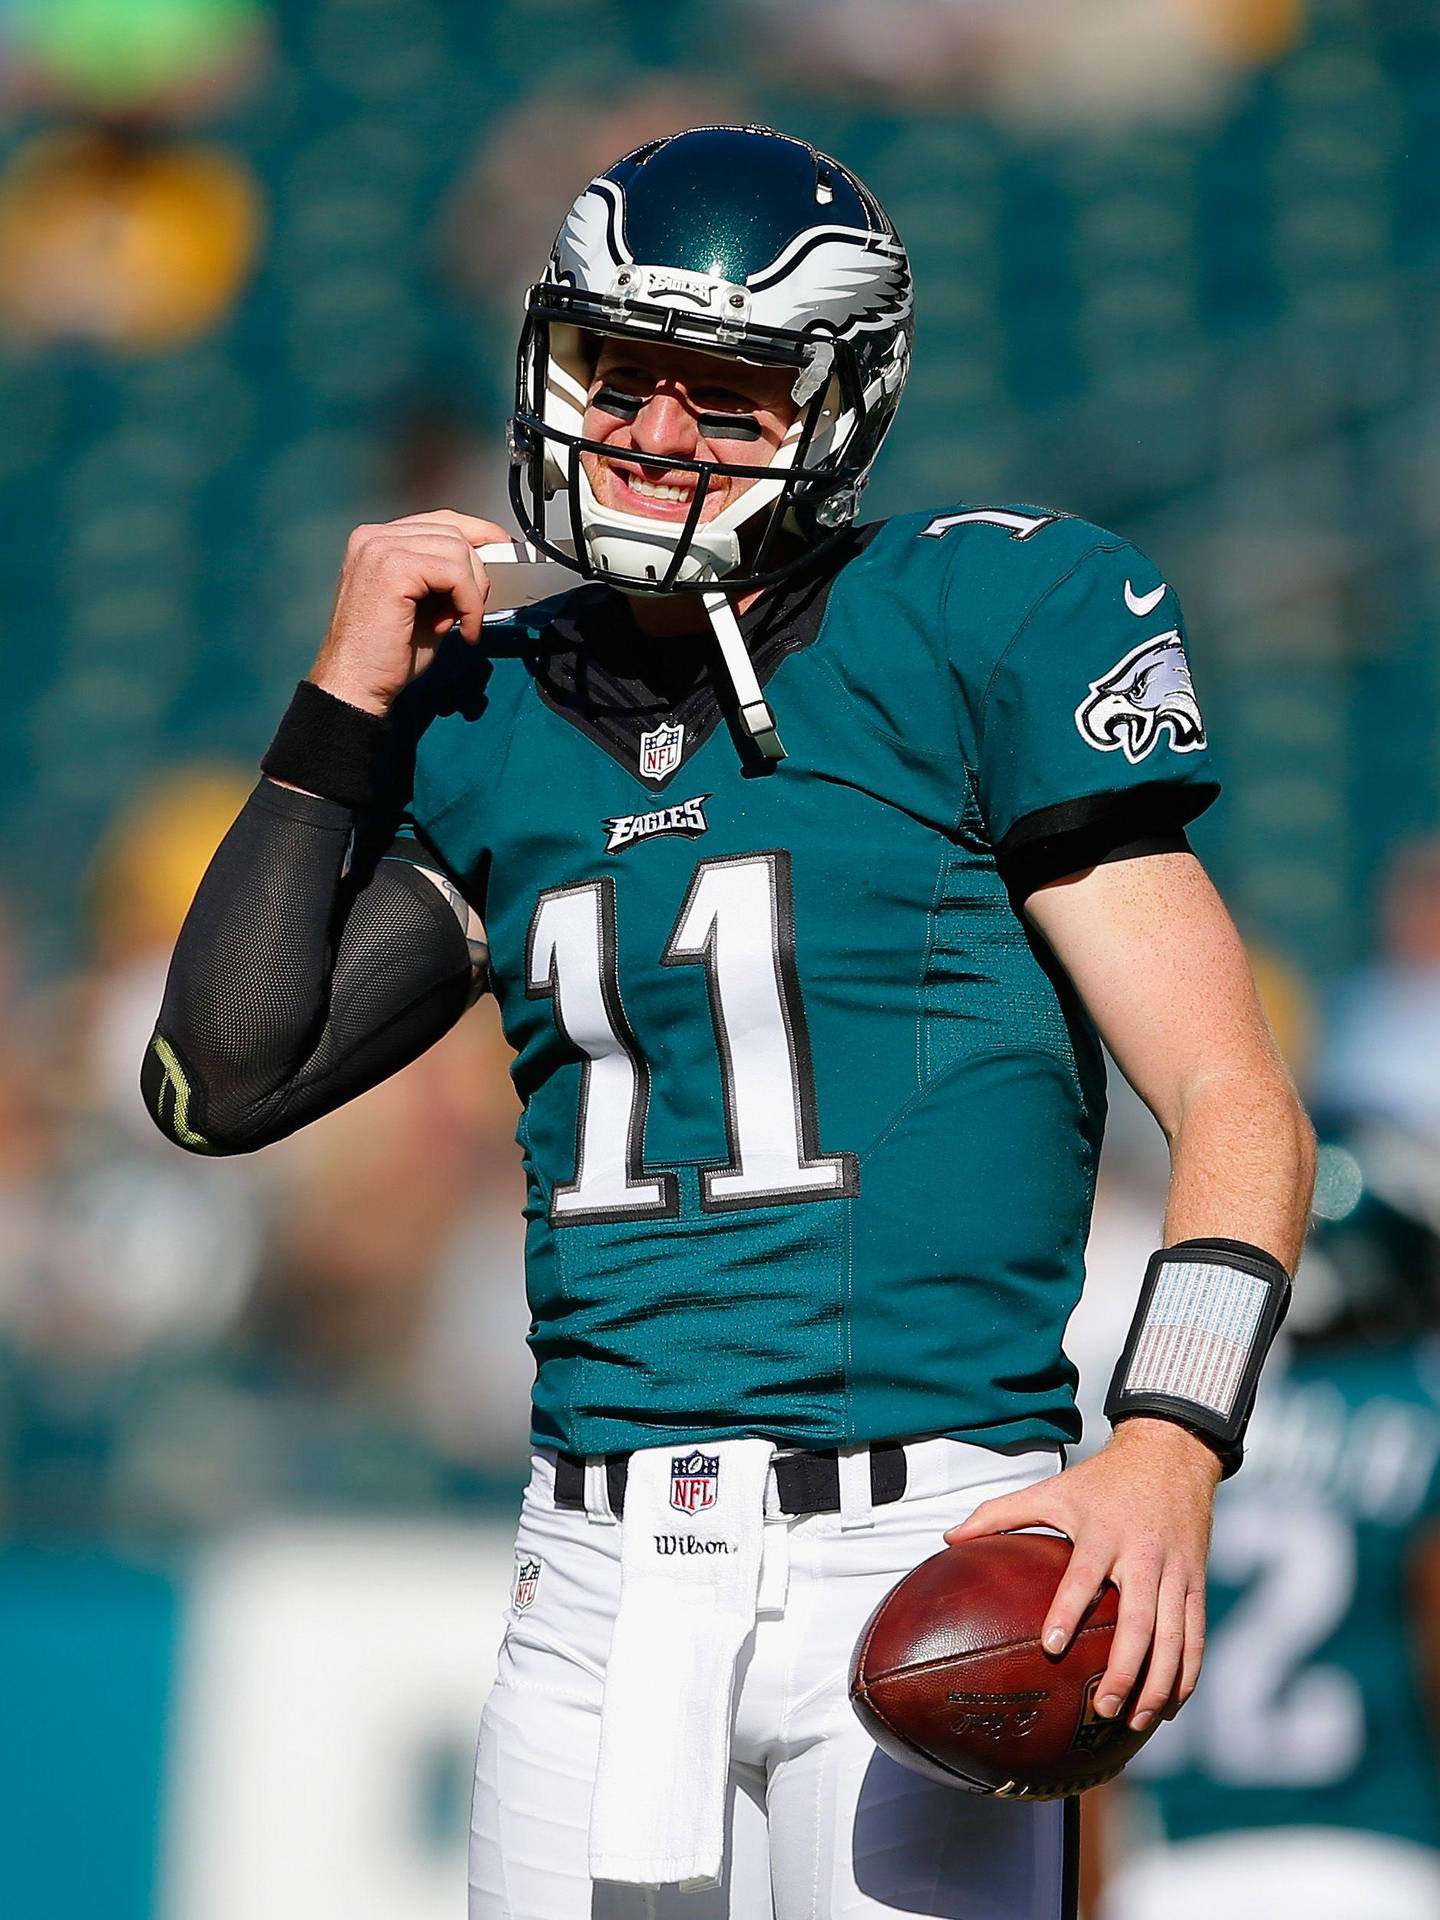 (in The Context Of Computer Or Mobile Wallpaper, This Could Be The Caption For An Image Of Philadelphia Eagles Quarterback Carson Wentz In His Green Uniform, Suitable For Use As A Background Image On A Device.) Wallpaper